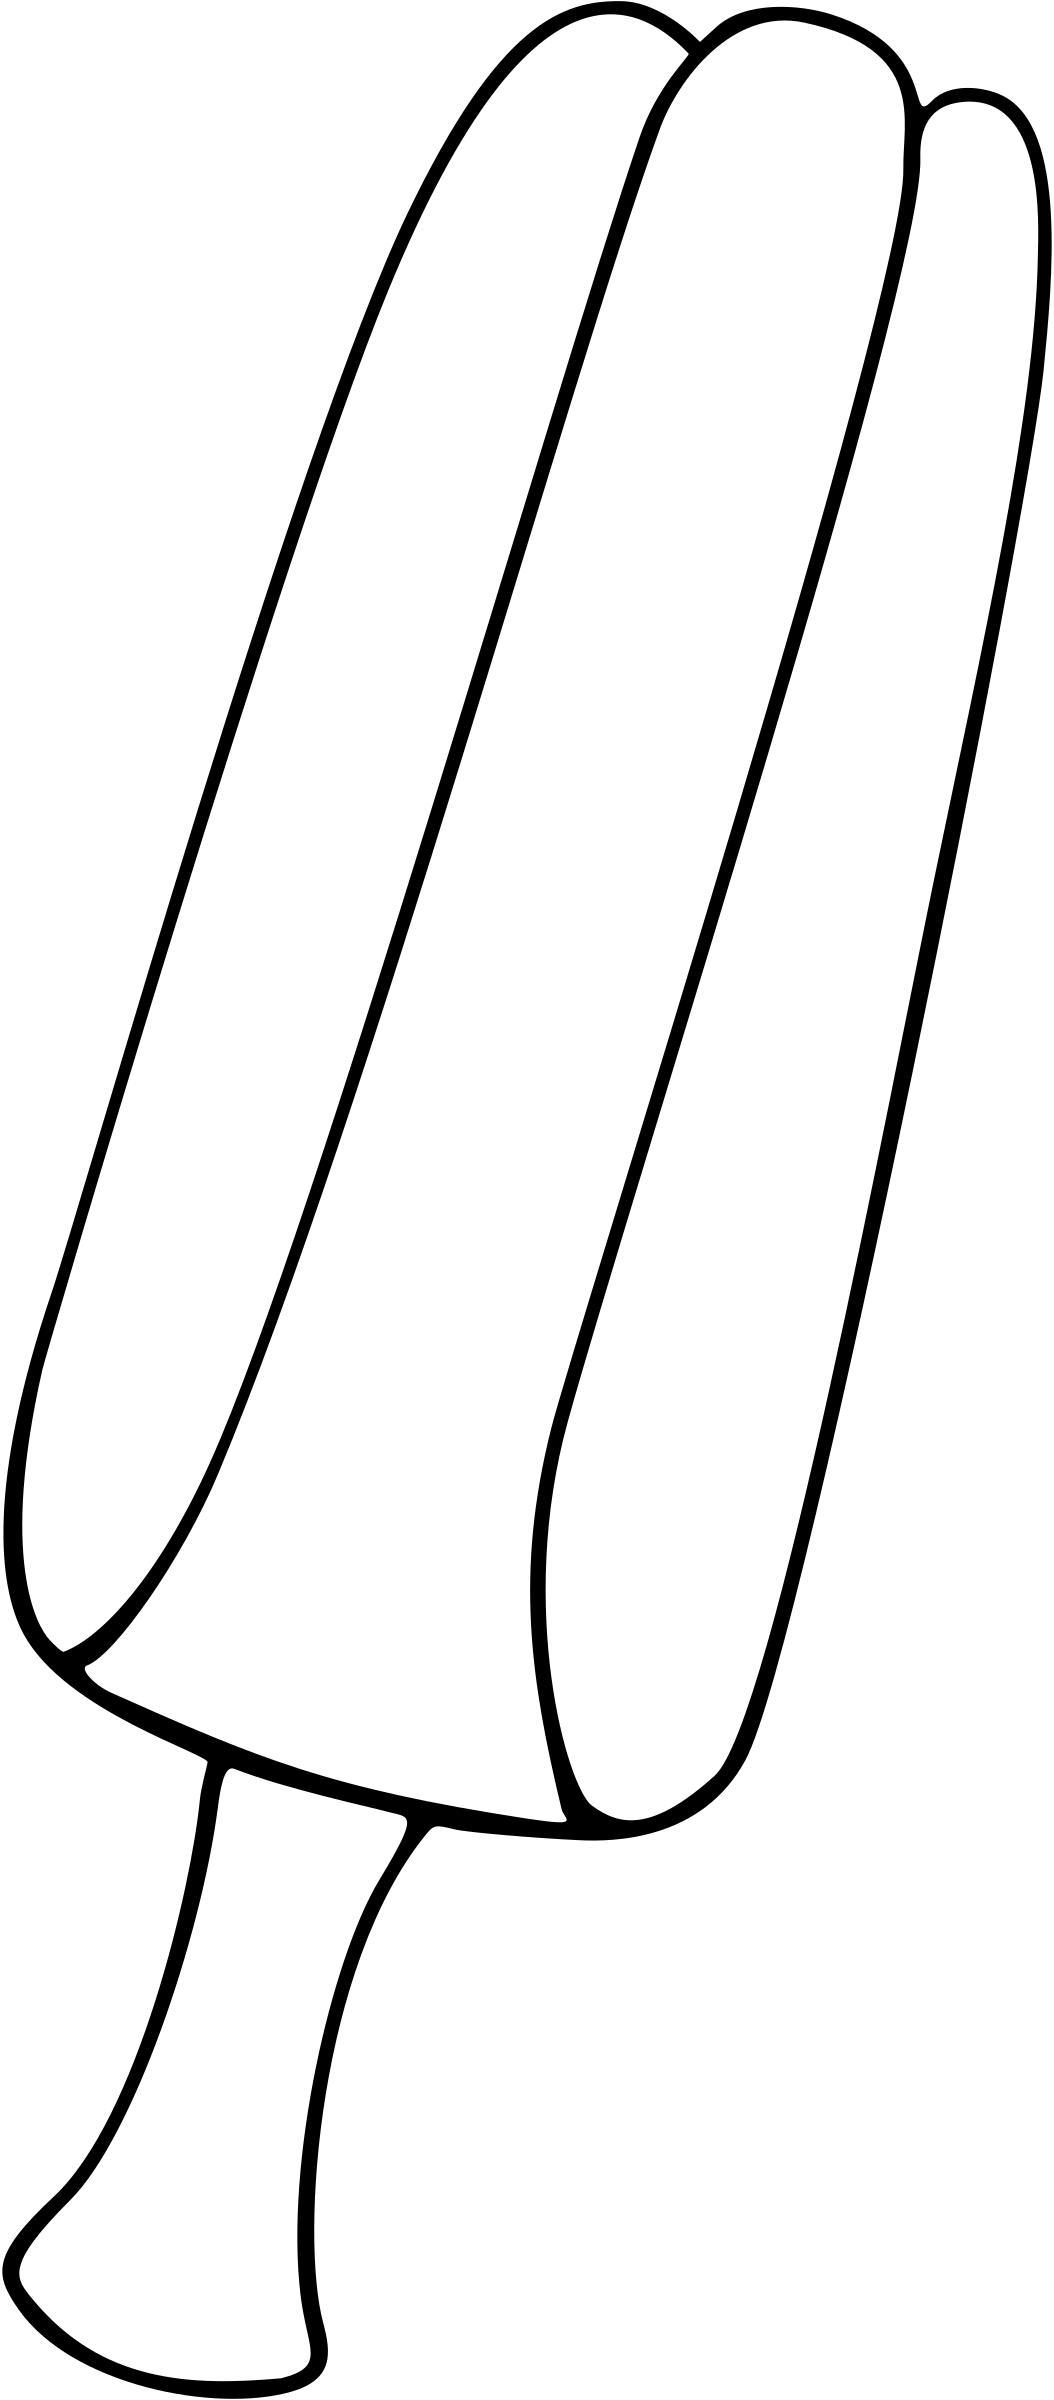 glace-5-bw png transparent